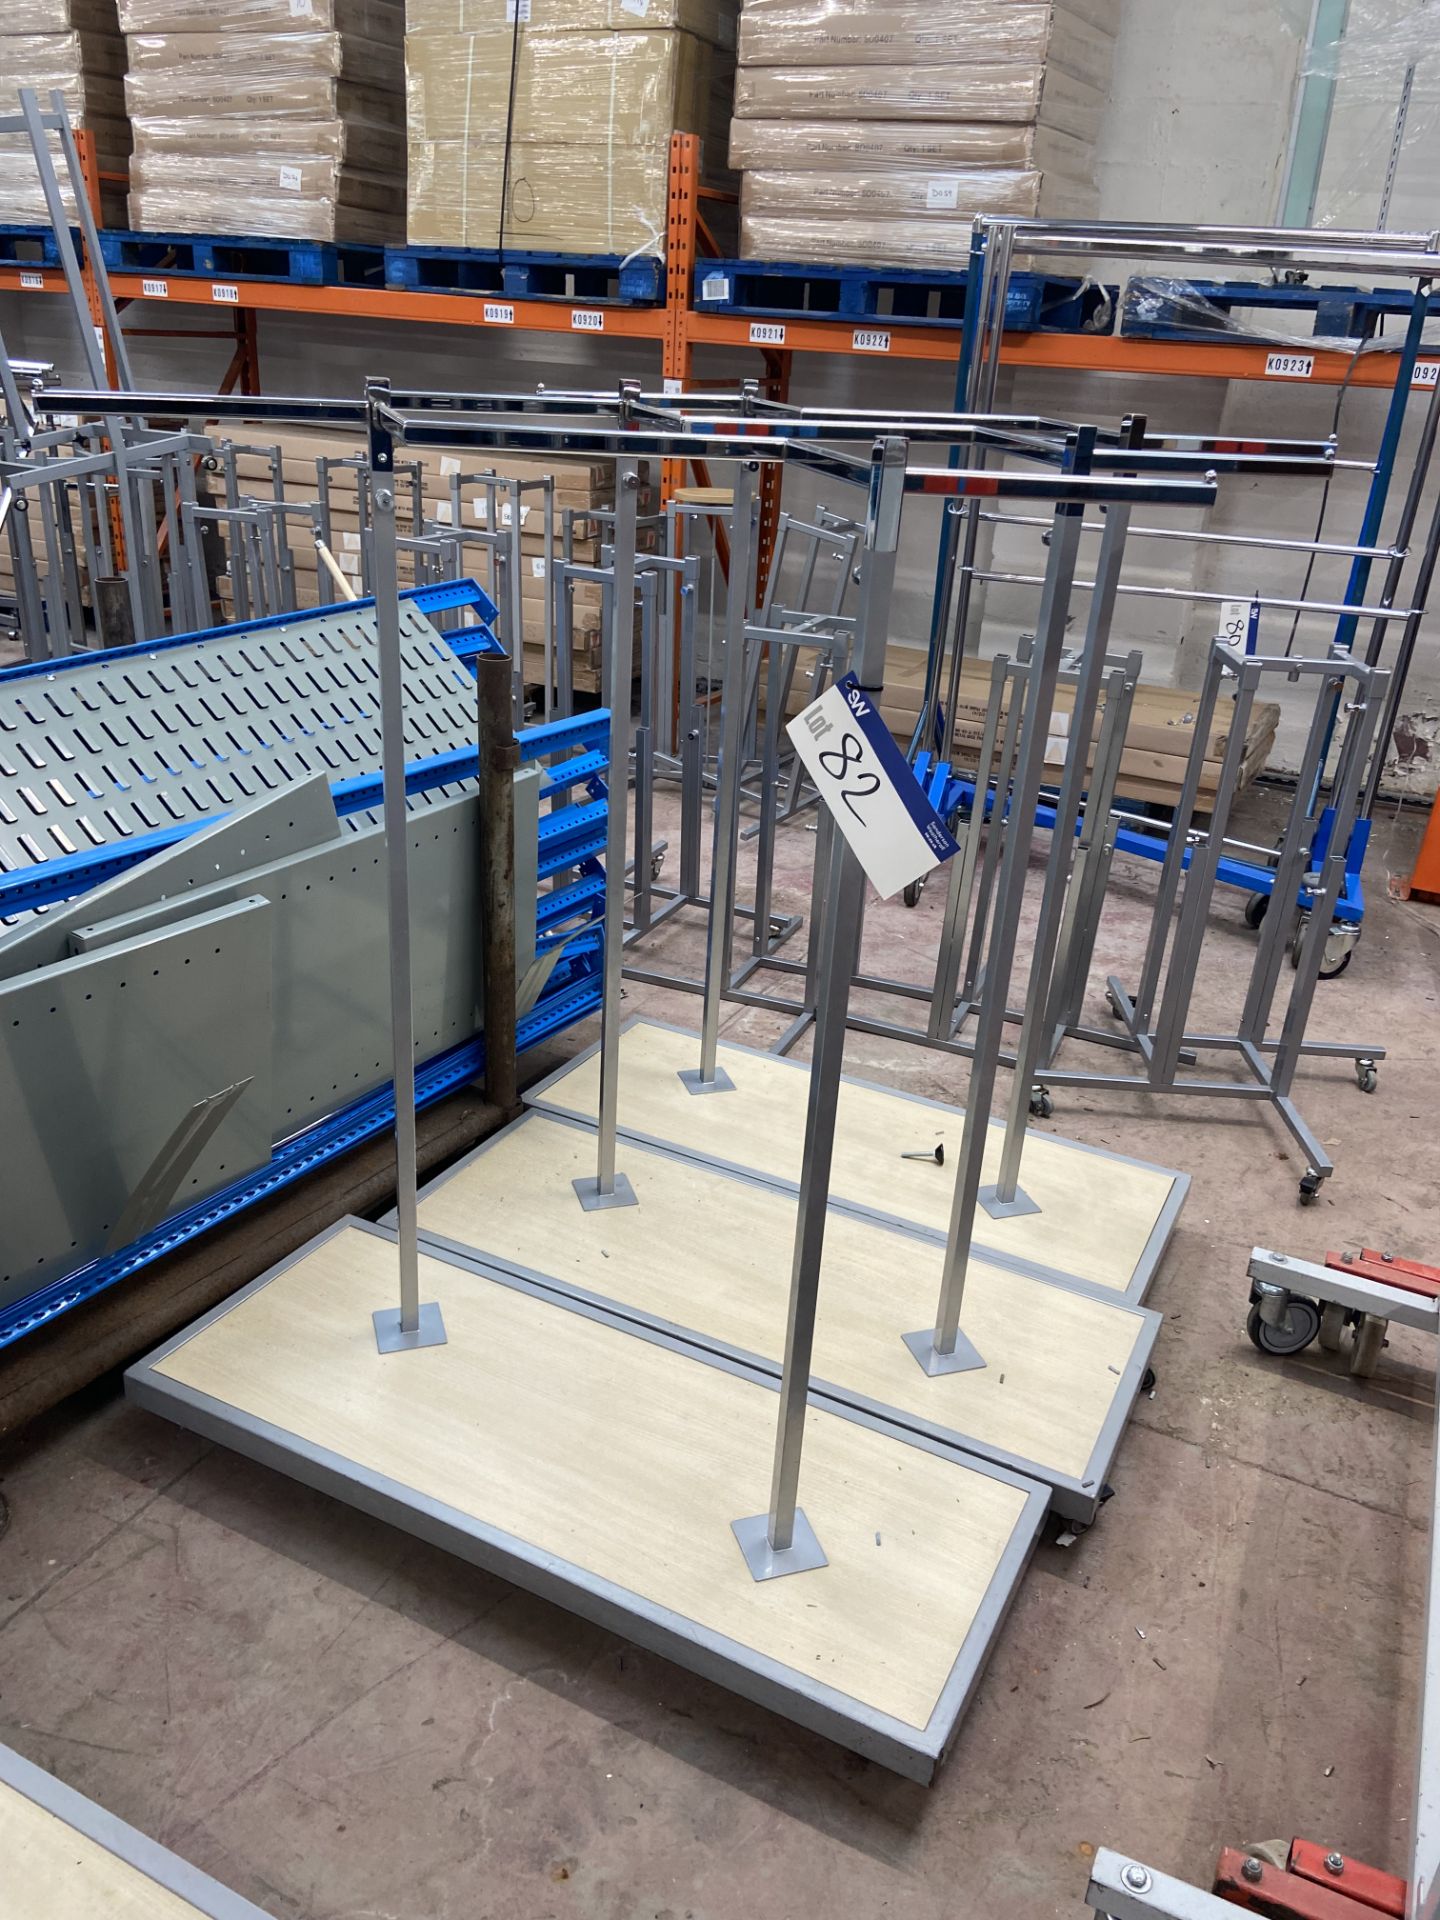 Three Mobile Garment Display Stands, each approx. 1.25m long, Lot located 33-37 Carron Place, East